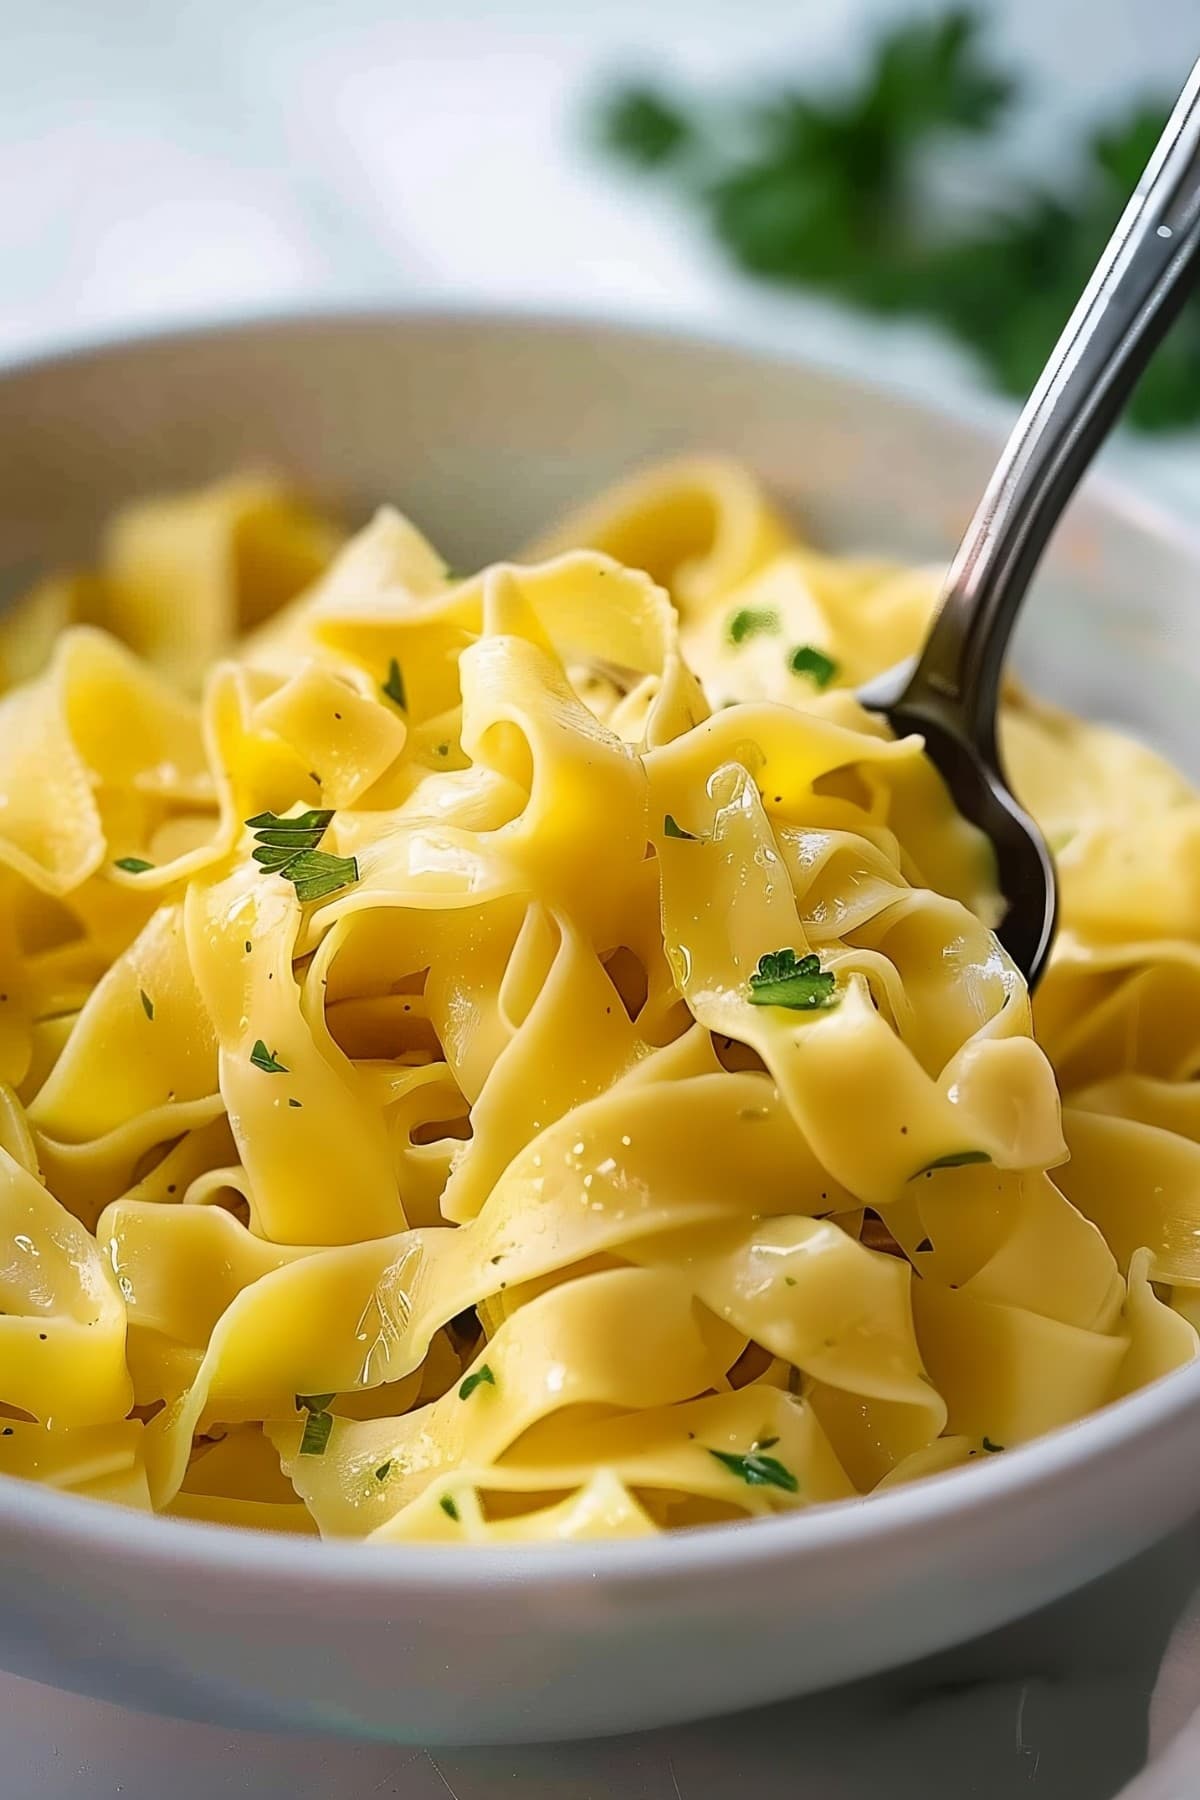 Irresistible Amish egg noodles, offering a delicate flavor and tender bite in every spoonful